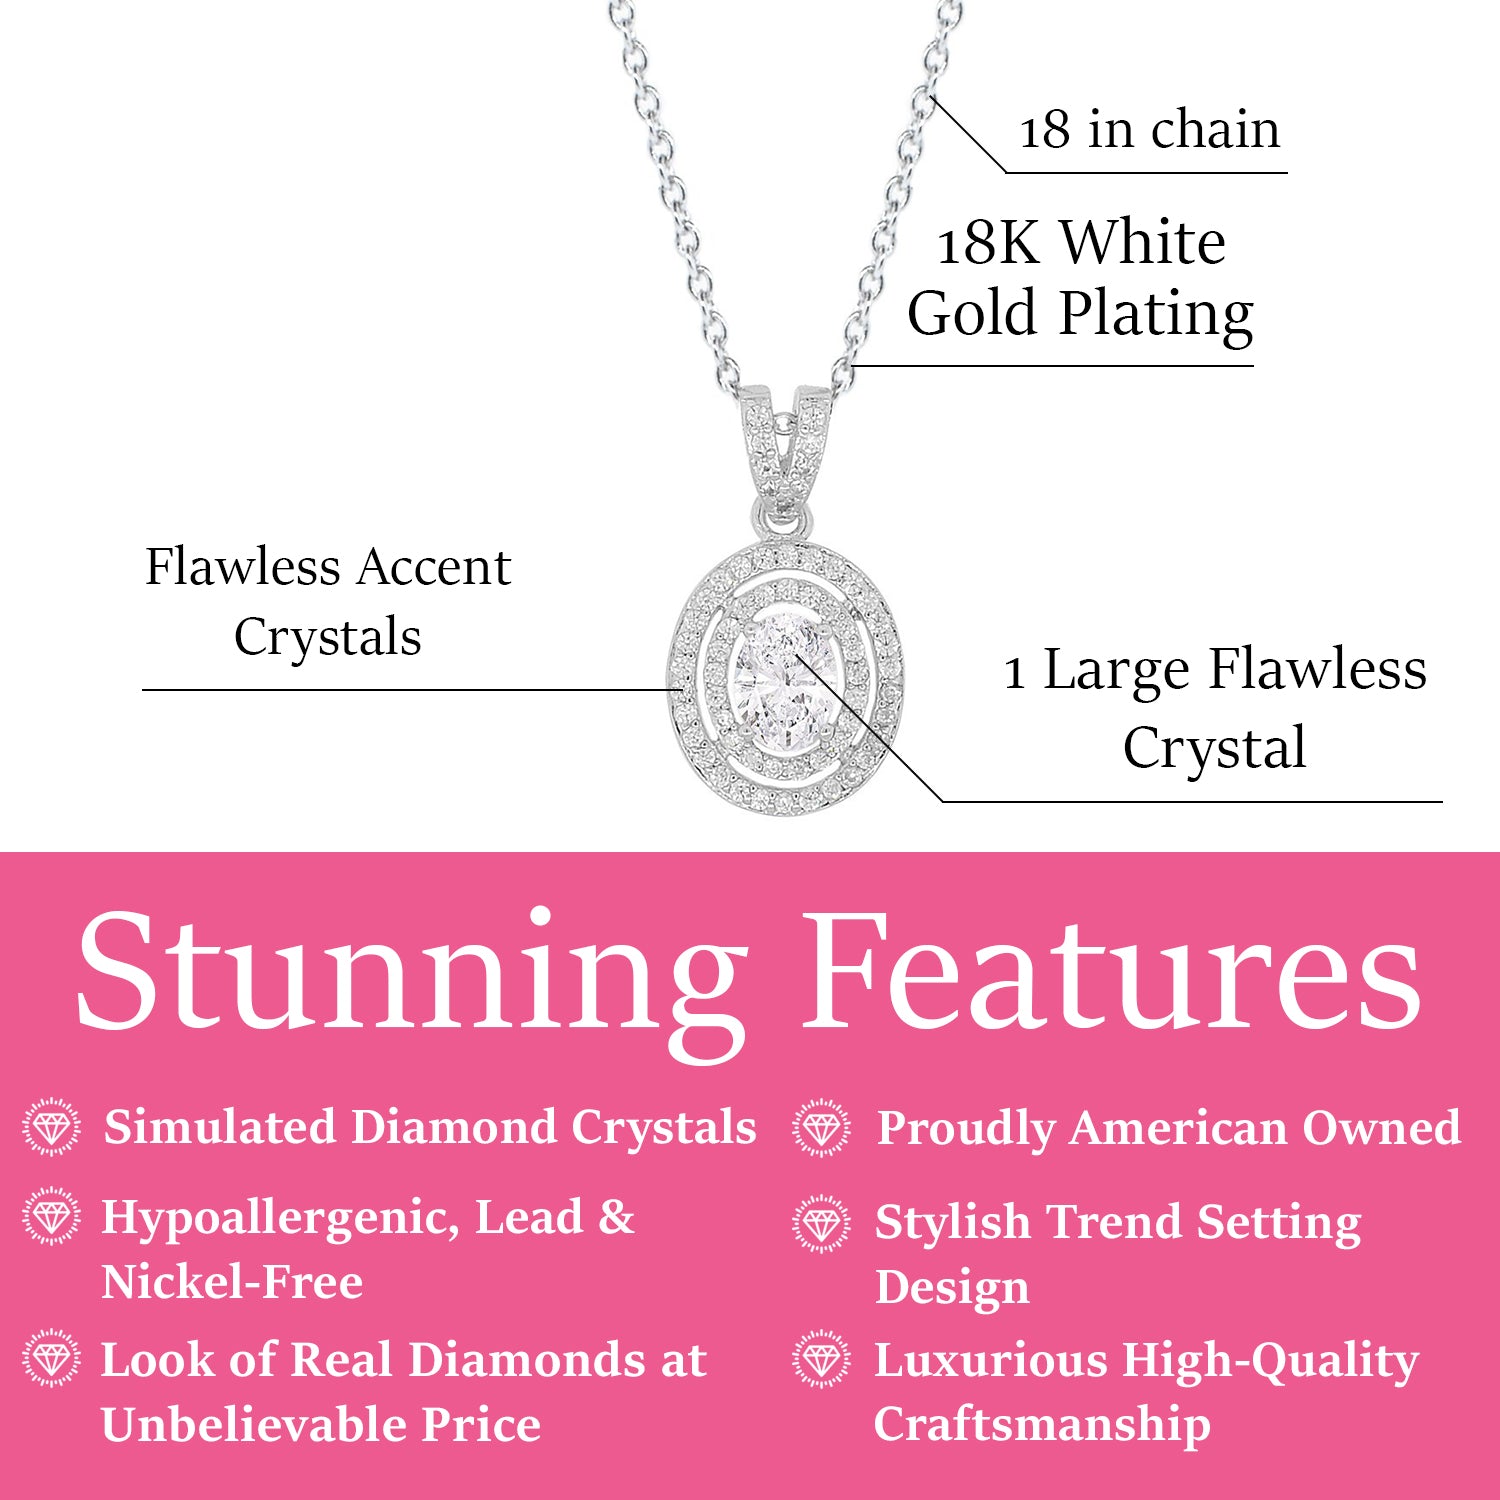 Zelda 18k White Gold Plated CZ Crystal Pendant Necklace - Cyber Monday Deal